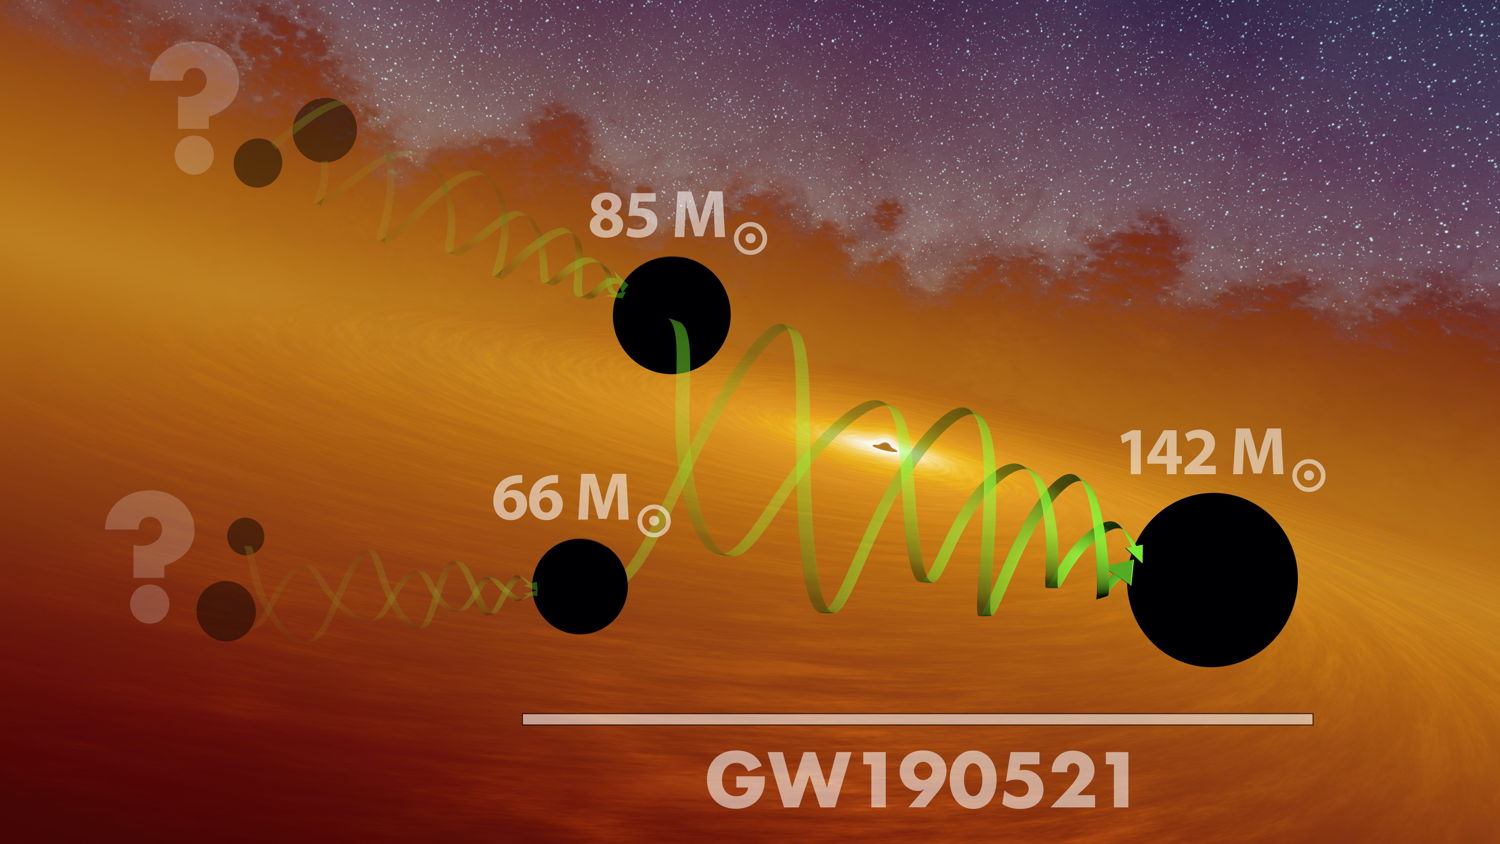 This artist's concept illustrates a hierarchical scheme for the merging black holes of GW190521. Credit: LIGO/Caltech/MIT/R. Hurt (IPAC)